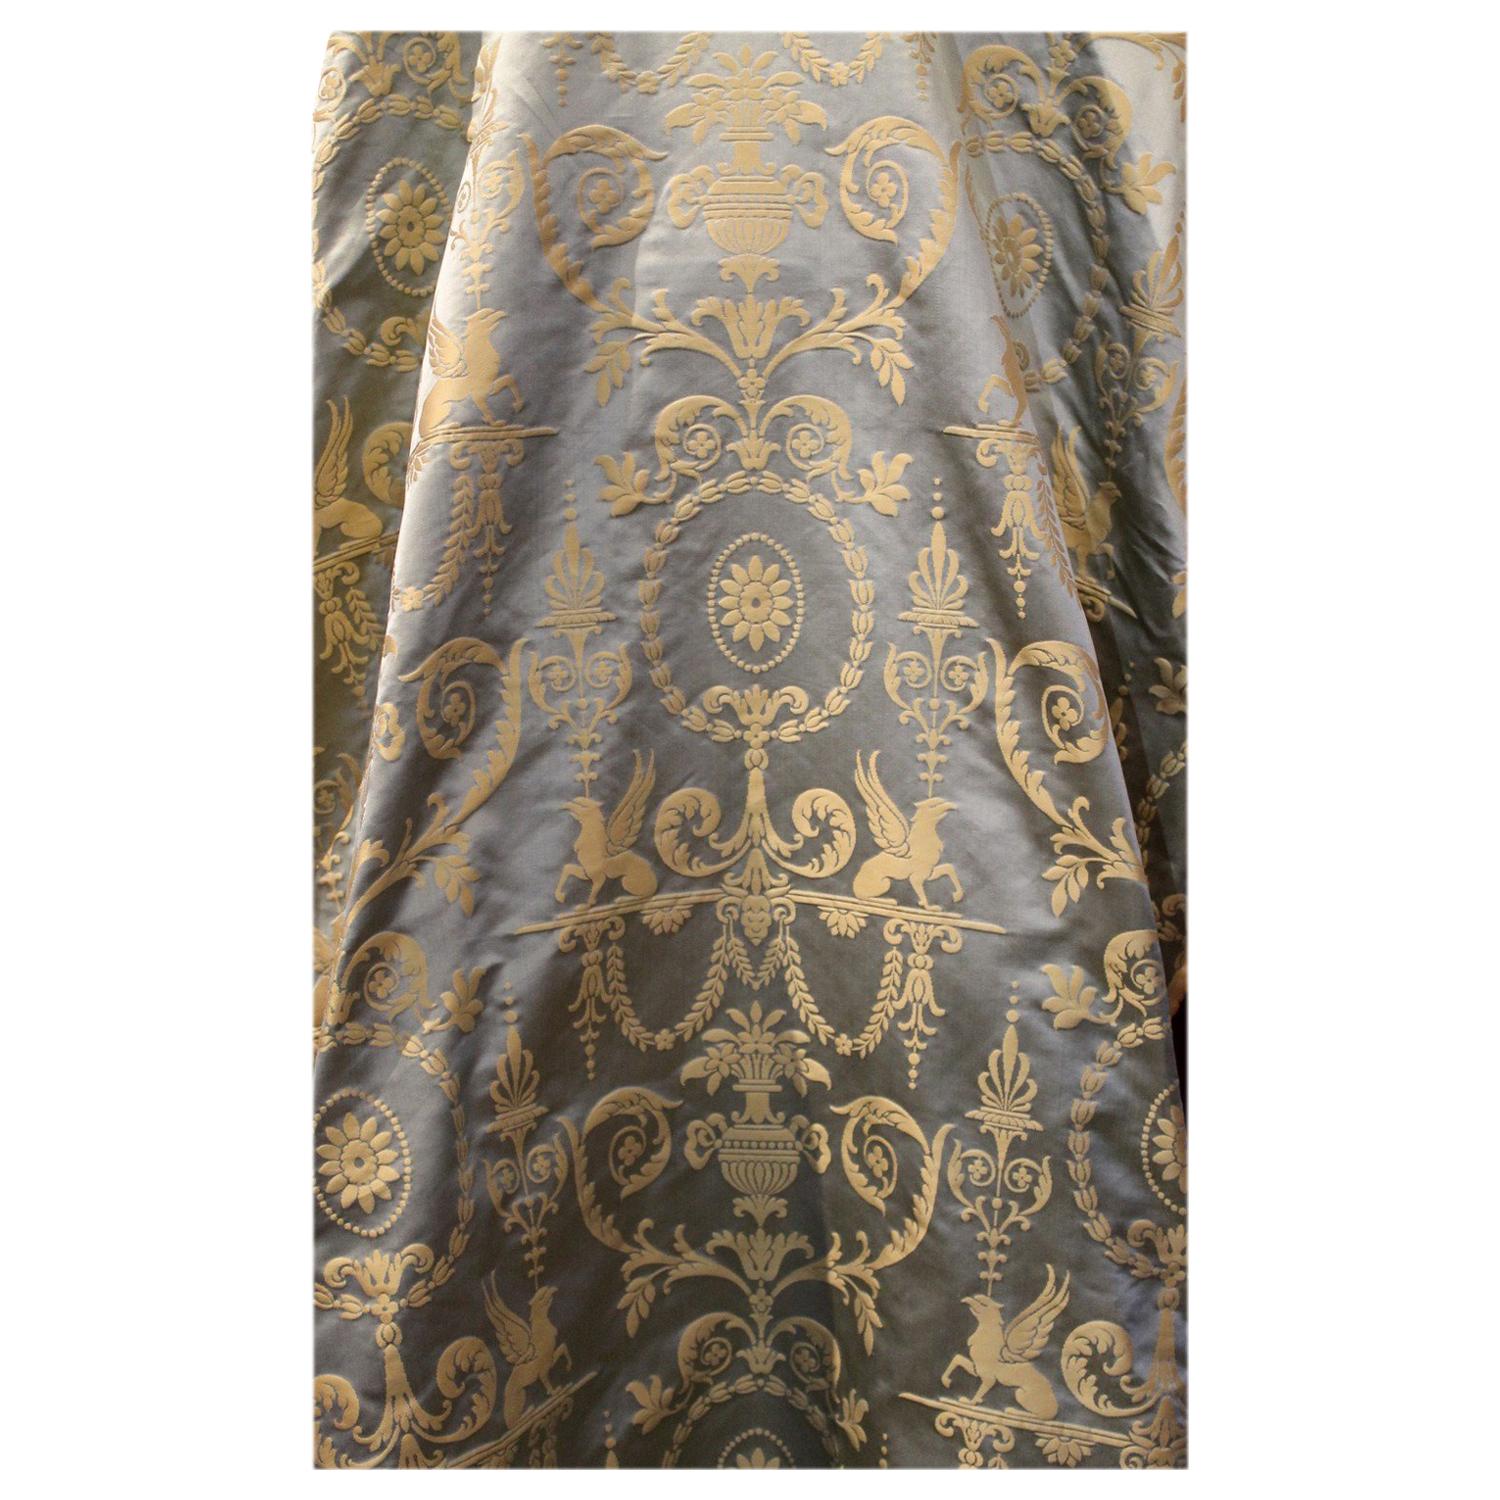 Italian Pure Silk Damask Fabric in Light Blue and Gold with Neoclassical Design